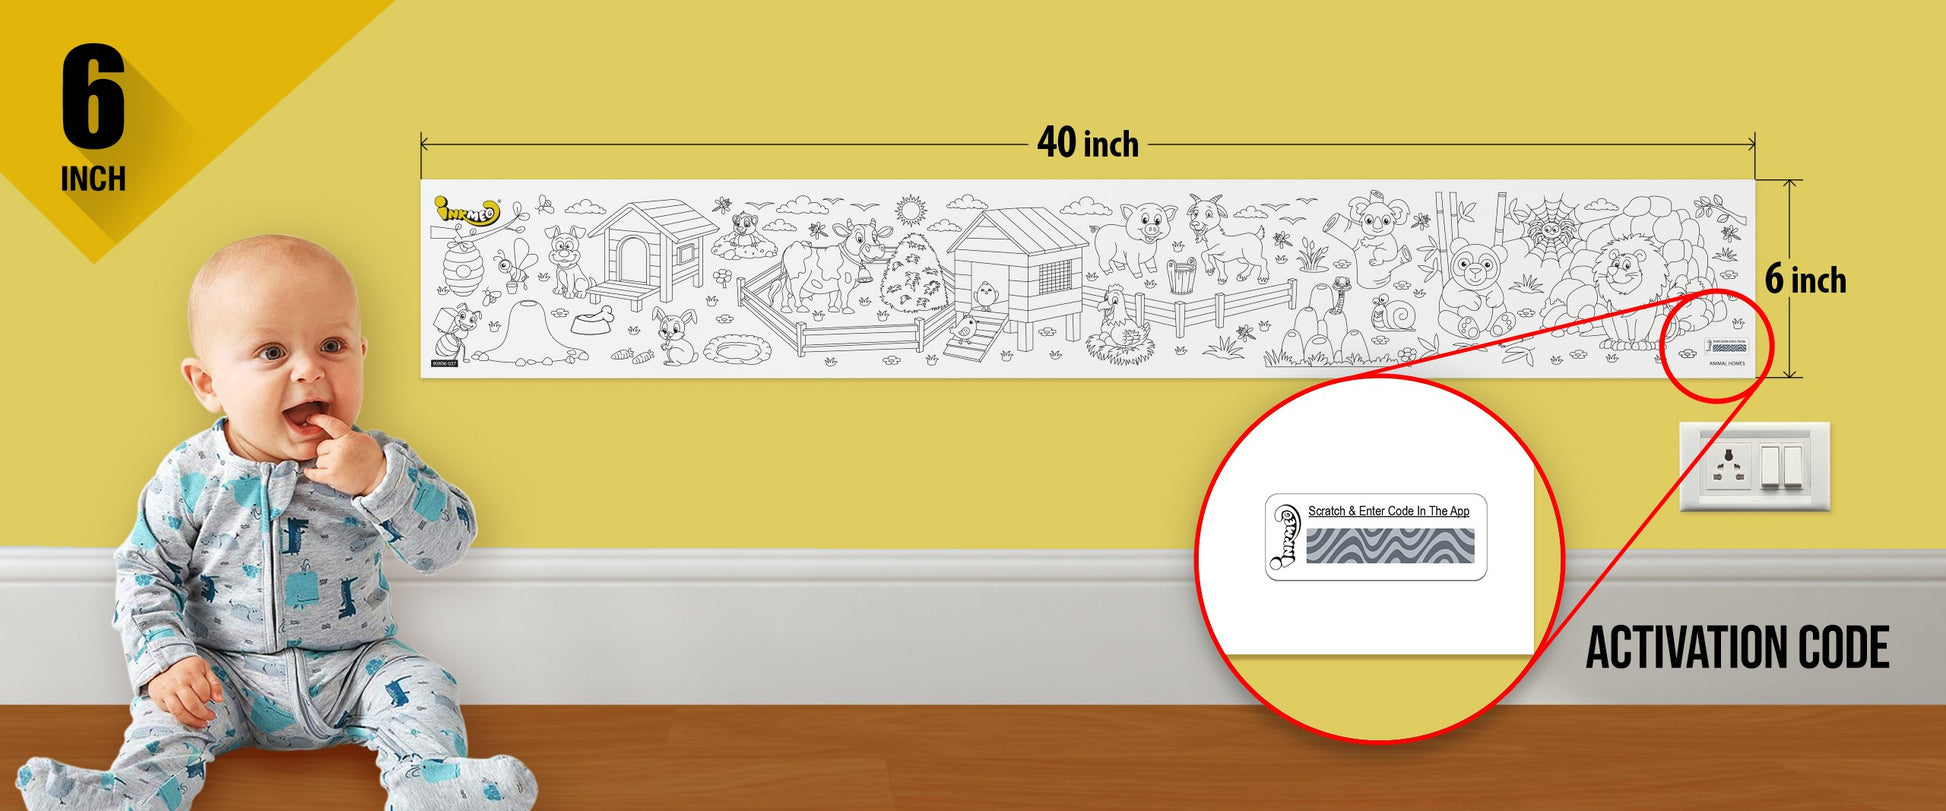 The image depicts a 6*40-inch roll adhered to the wall with a baby playing nearby, and the activation code is zoomed in separately